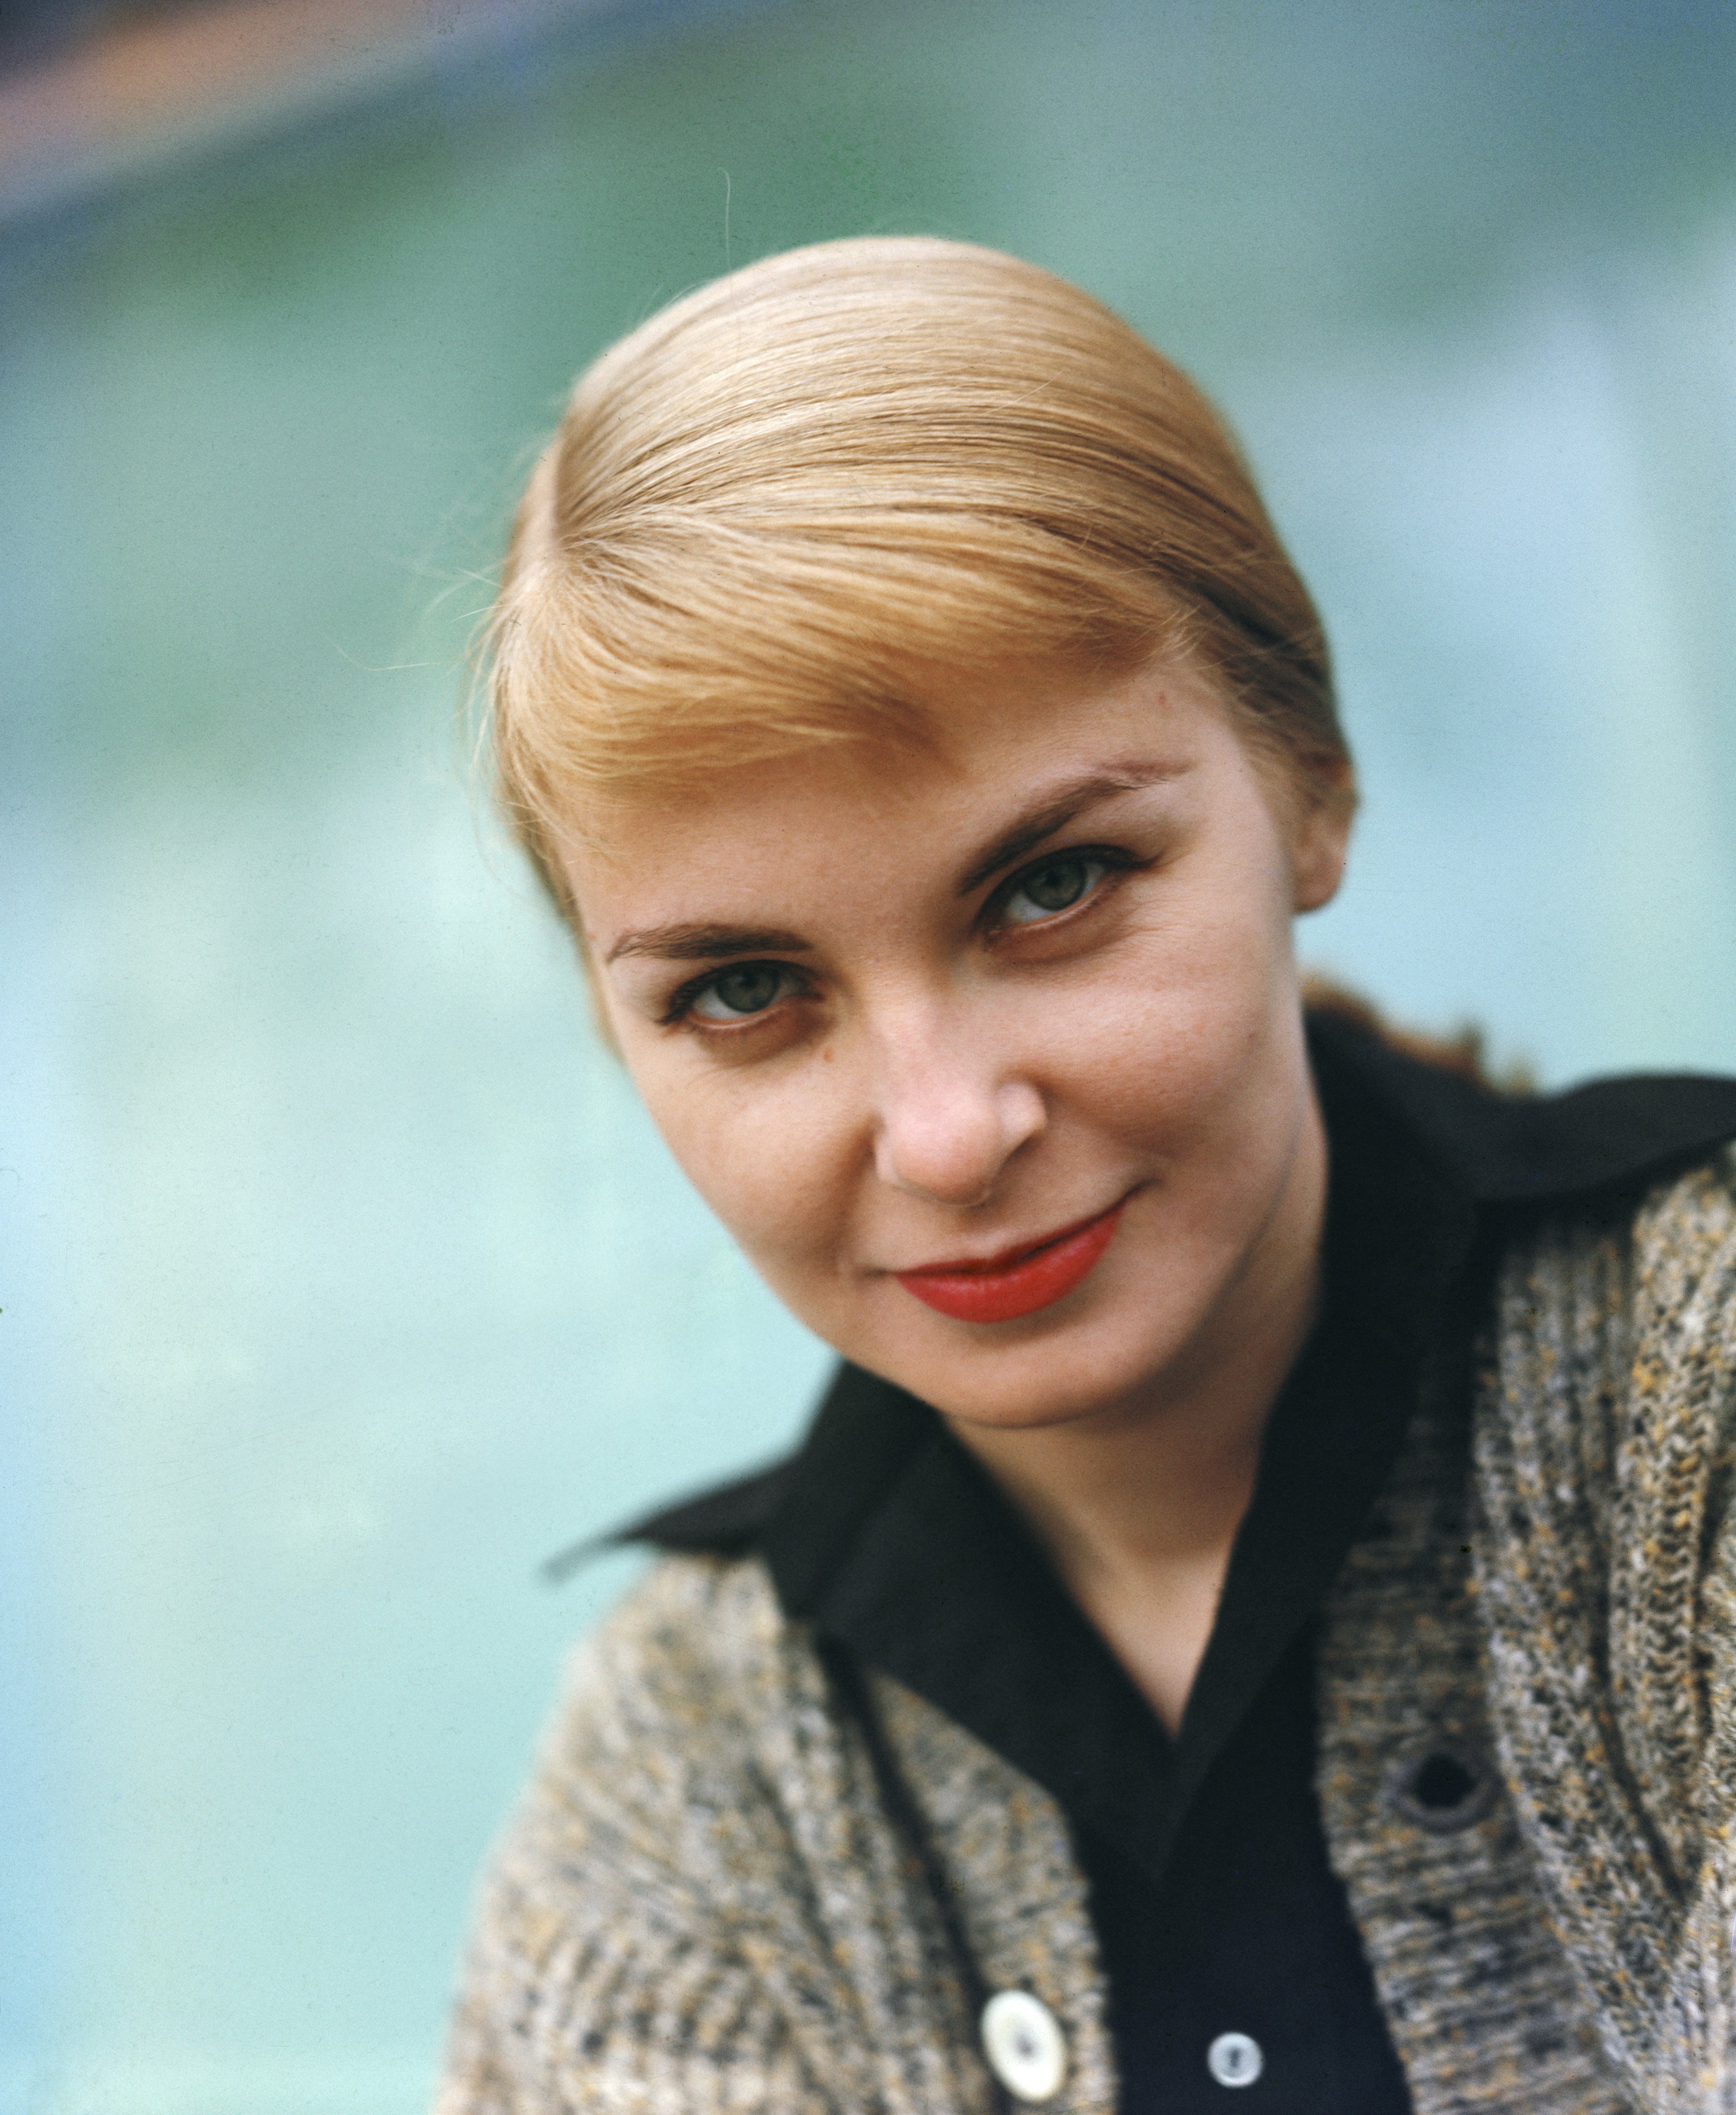 Joanne Woodward posing for a photo, circa 1960 | Source: Getty Images